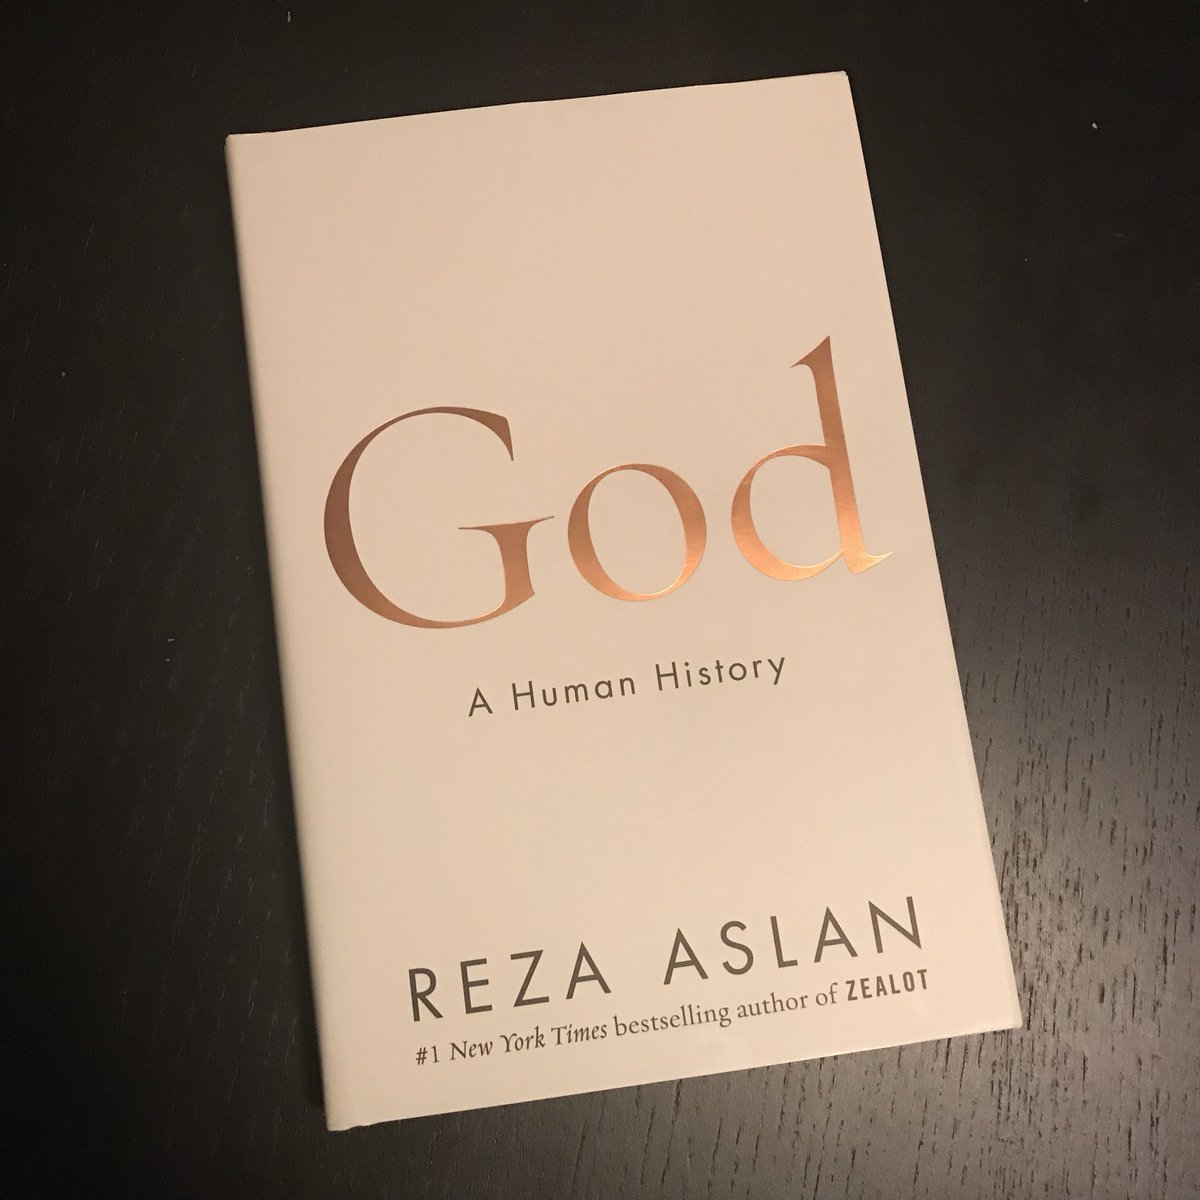 God: A Human History – a rescue attempt by Reza Aslan, The Freethinker, 23 November 2017